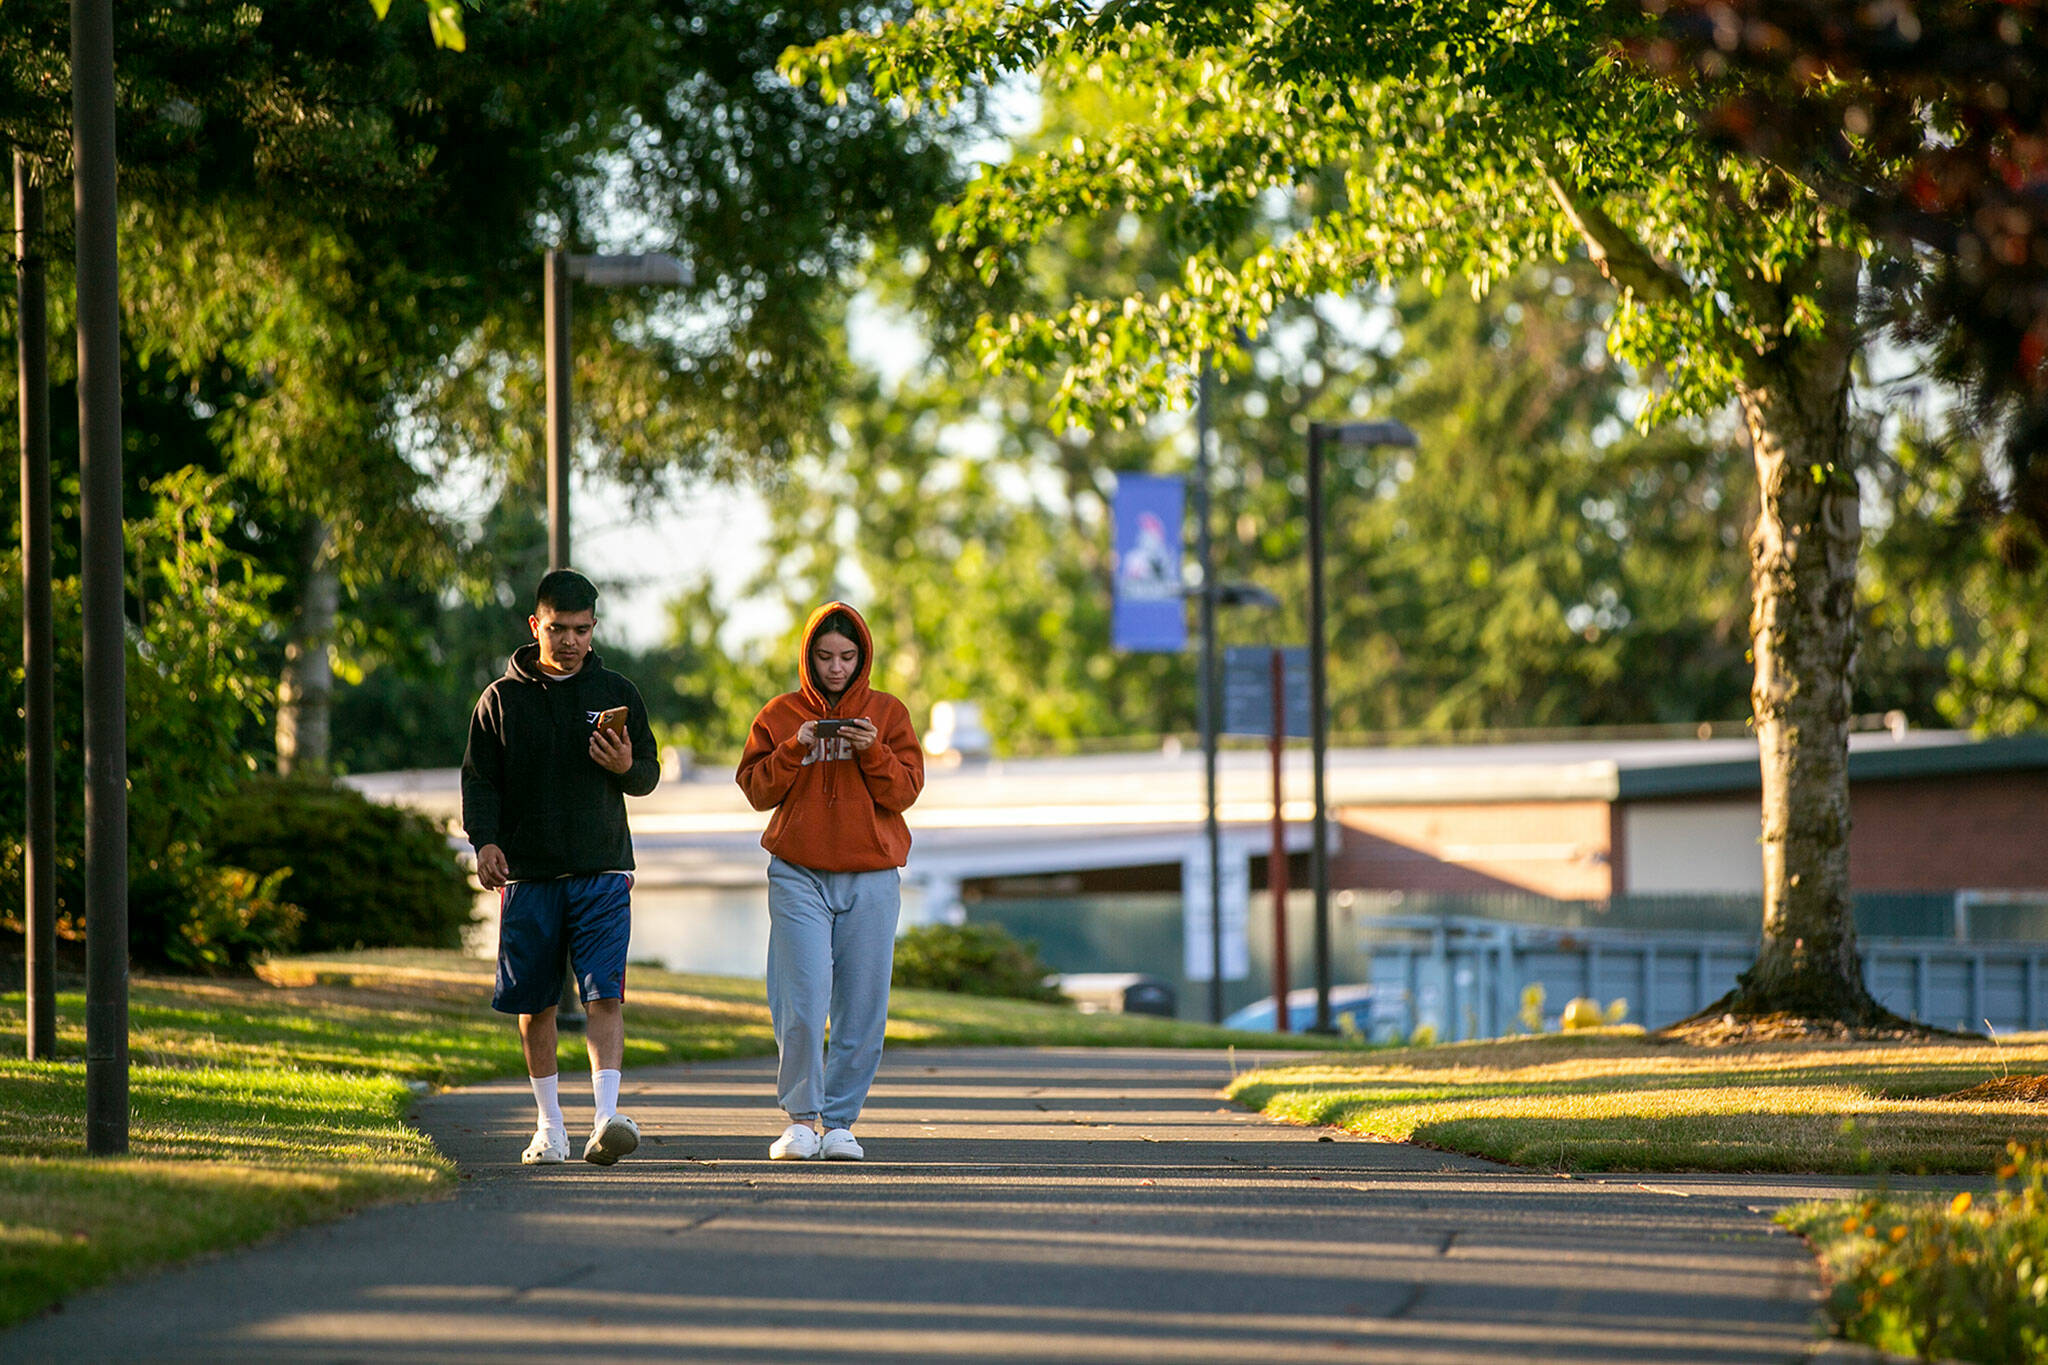 Two students walk along a path through campus Thursday, at Everett Community College in Everett. The college’s youth-reengagement program has lost its funding, and around 150 students are now without the money they need to attend classes. (Ryan Berry / The Herald)